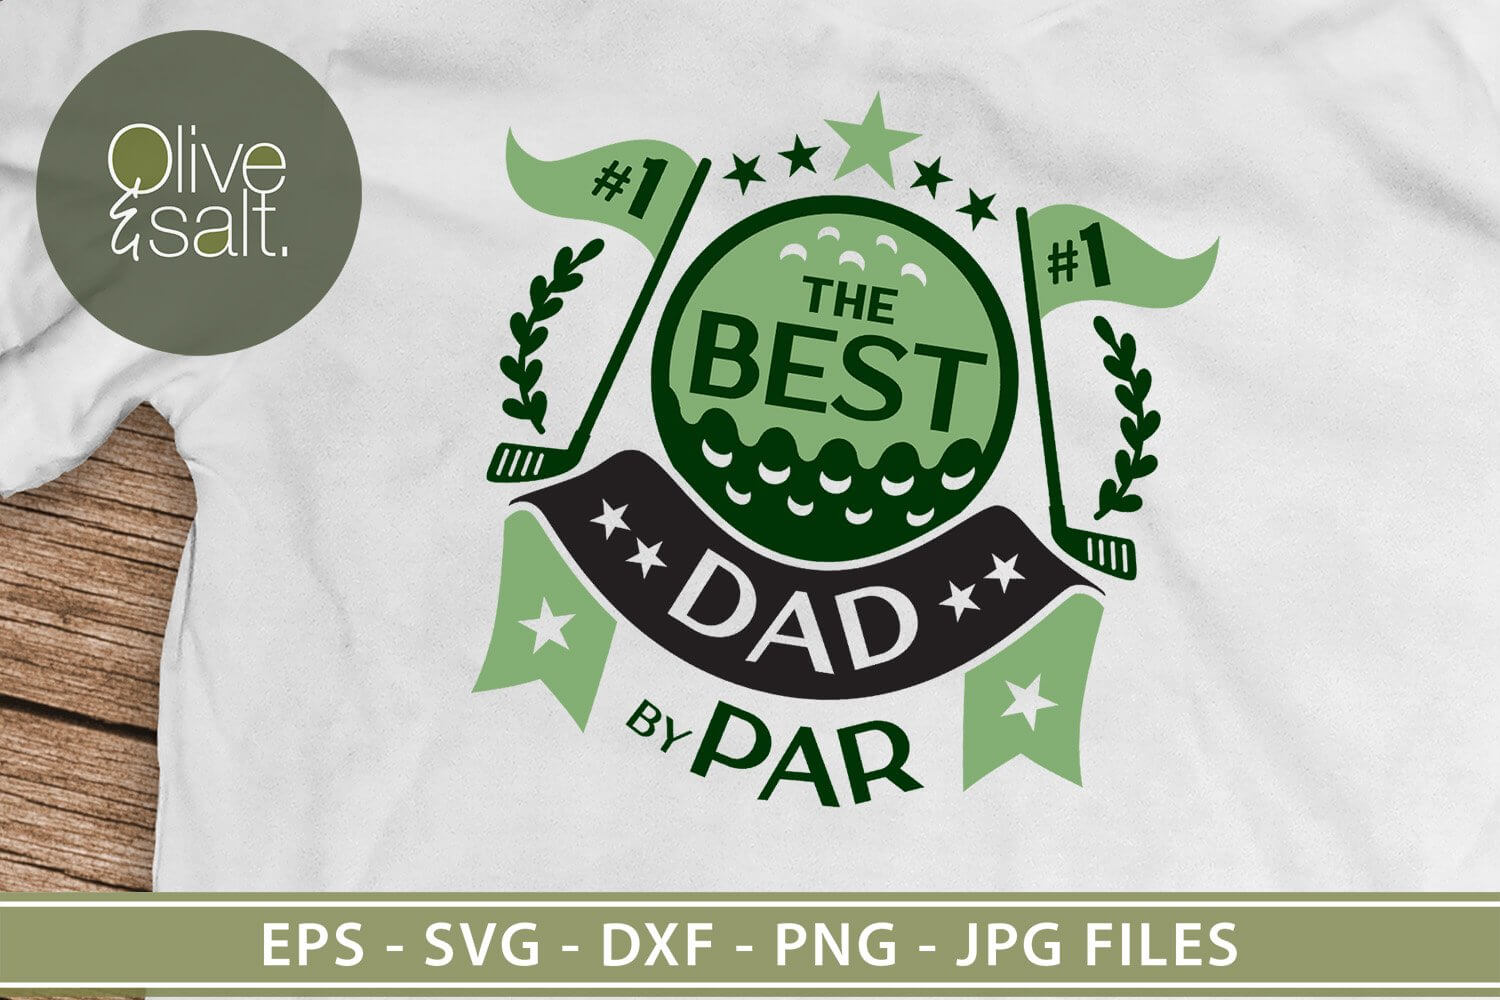 White T-shirt with green "The Best Dad by Par" logo.